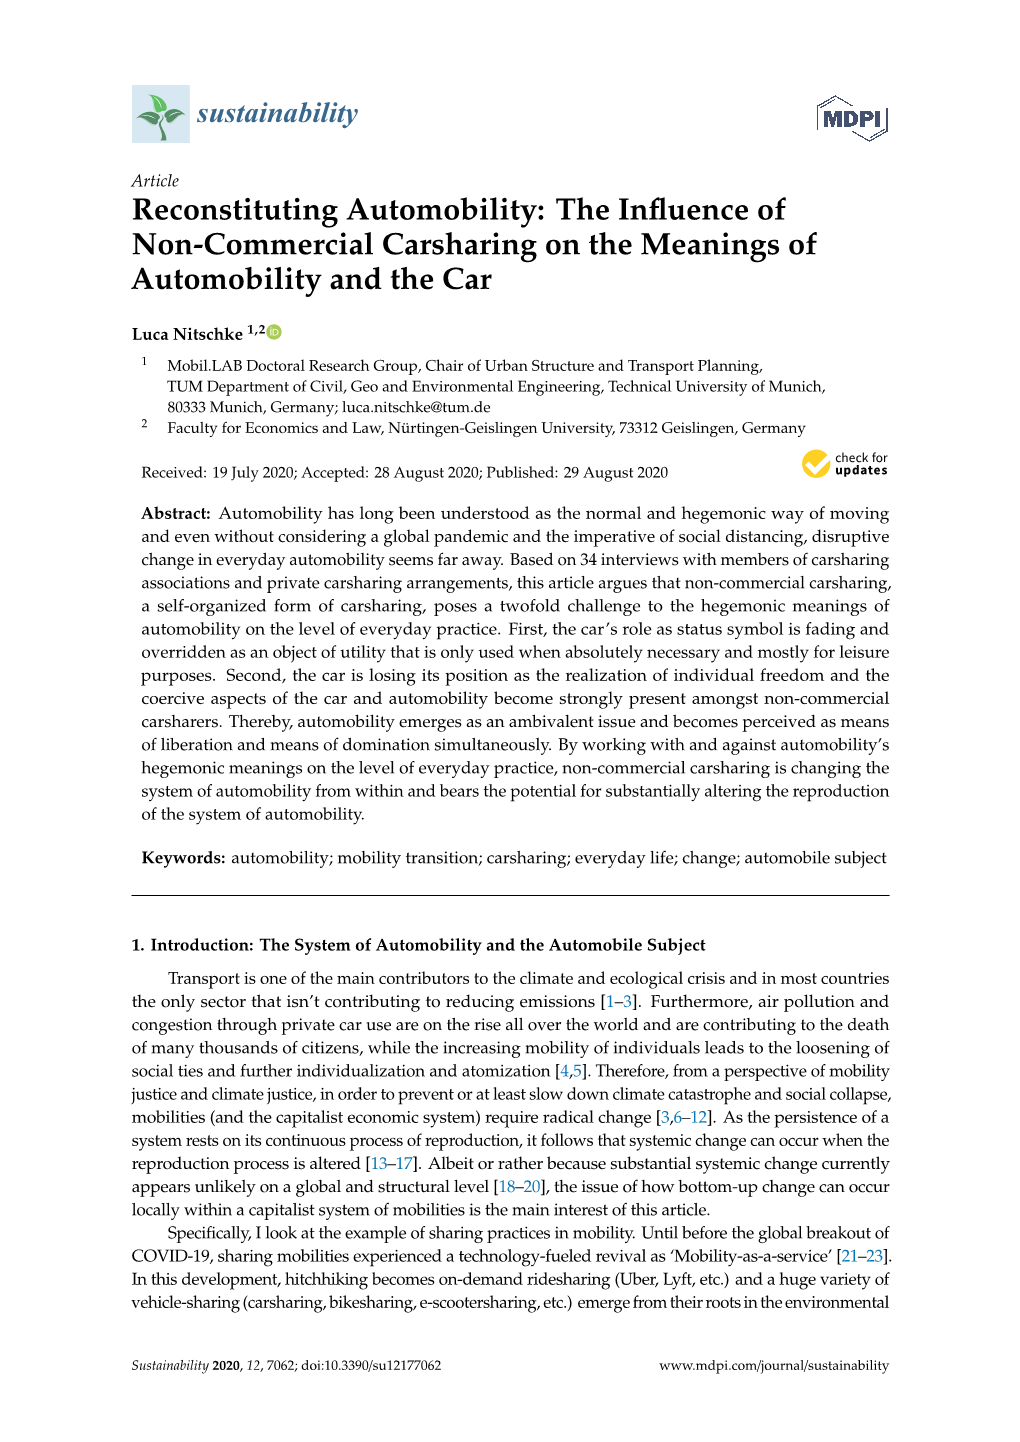 The Influence of Non-Commercial Carsharing on the Meanings of Automobility and The